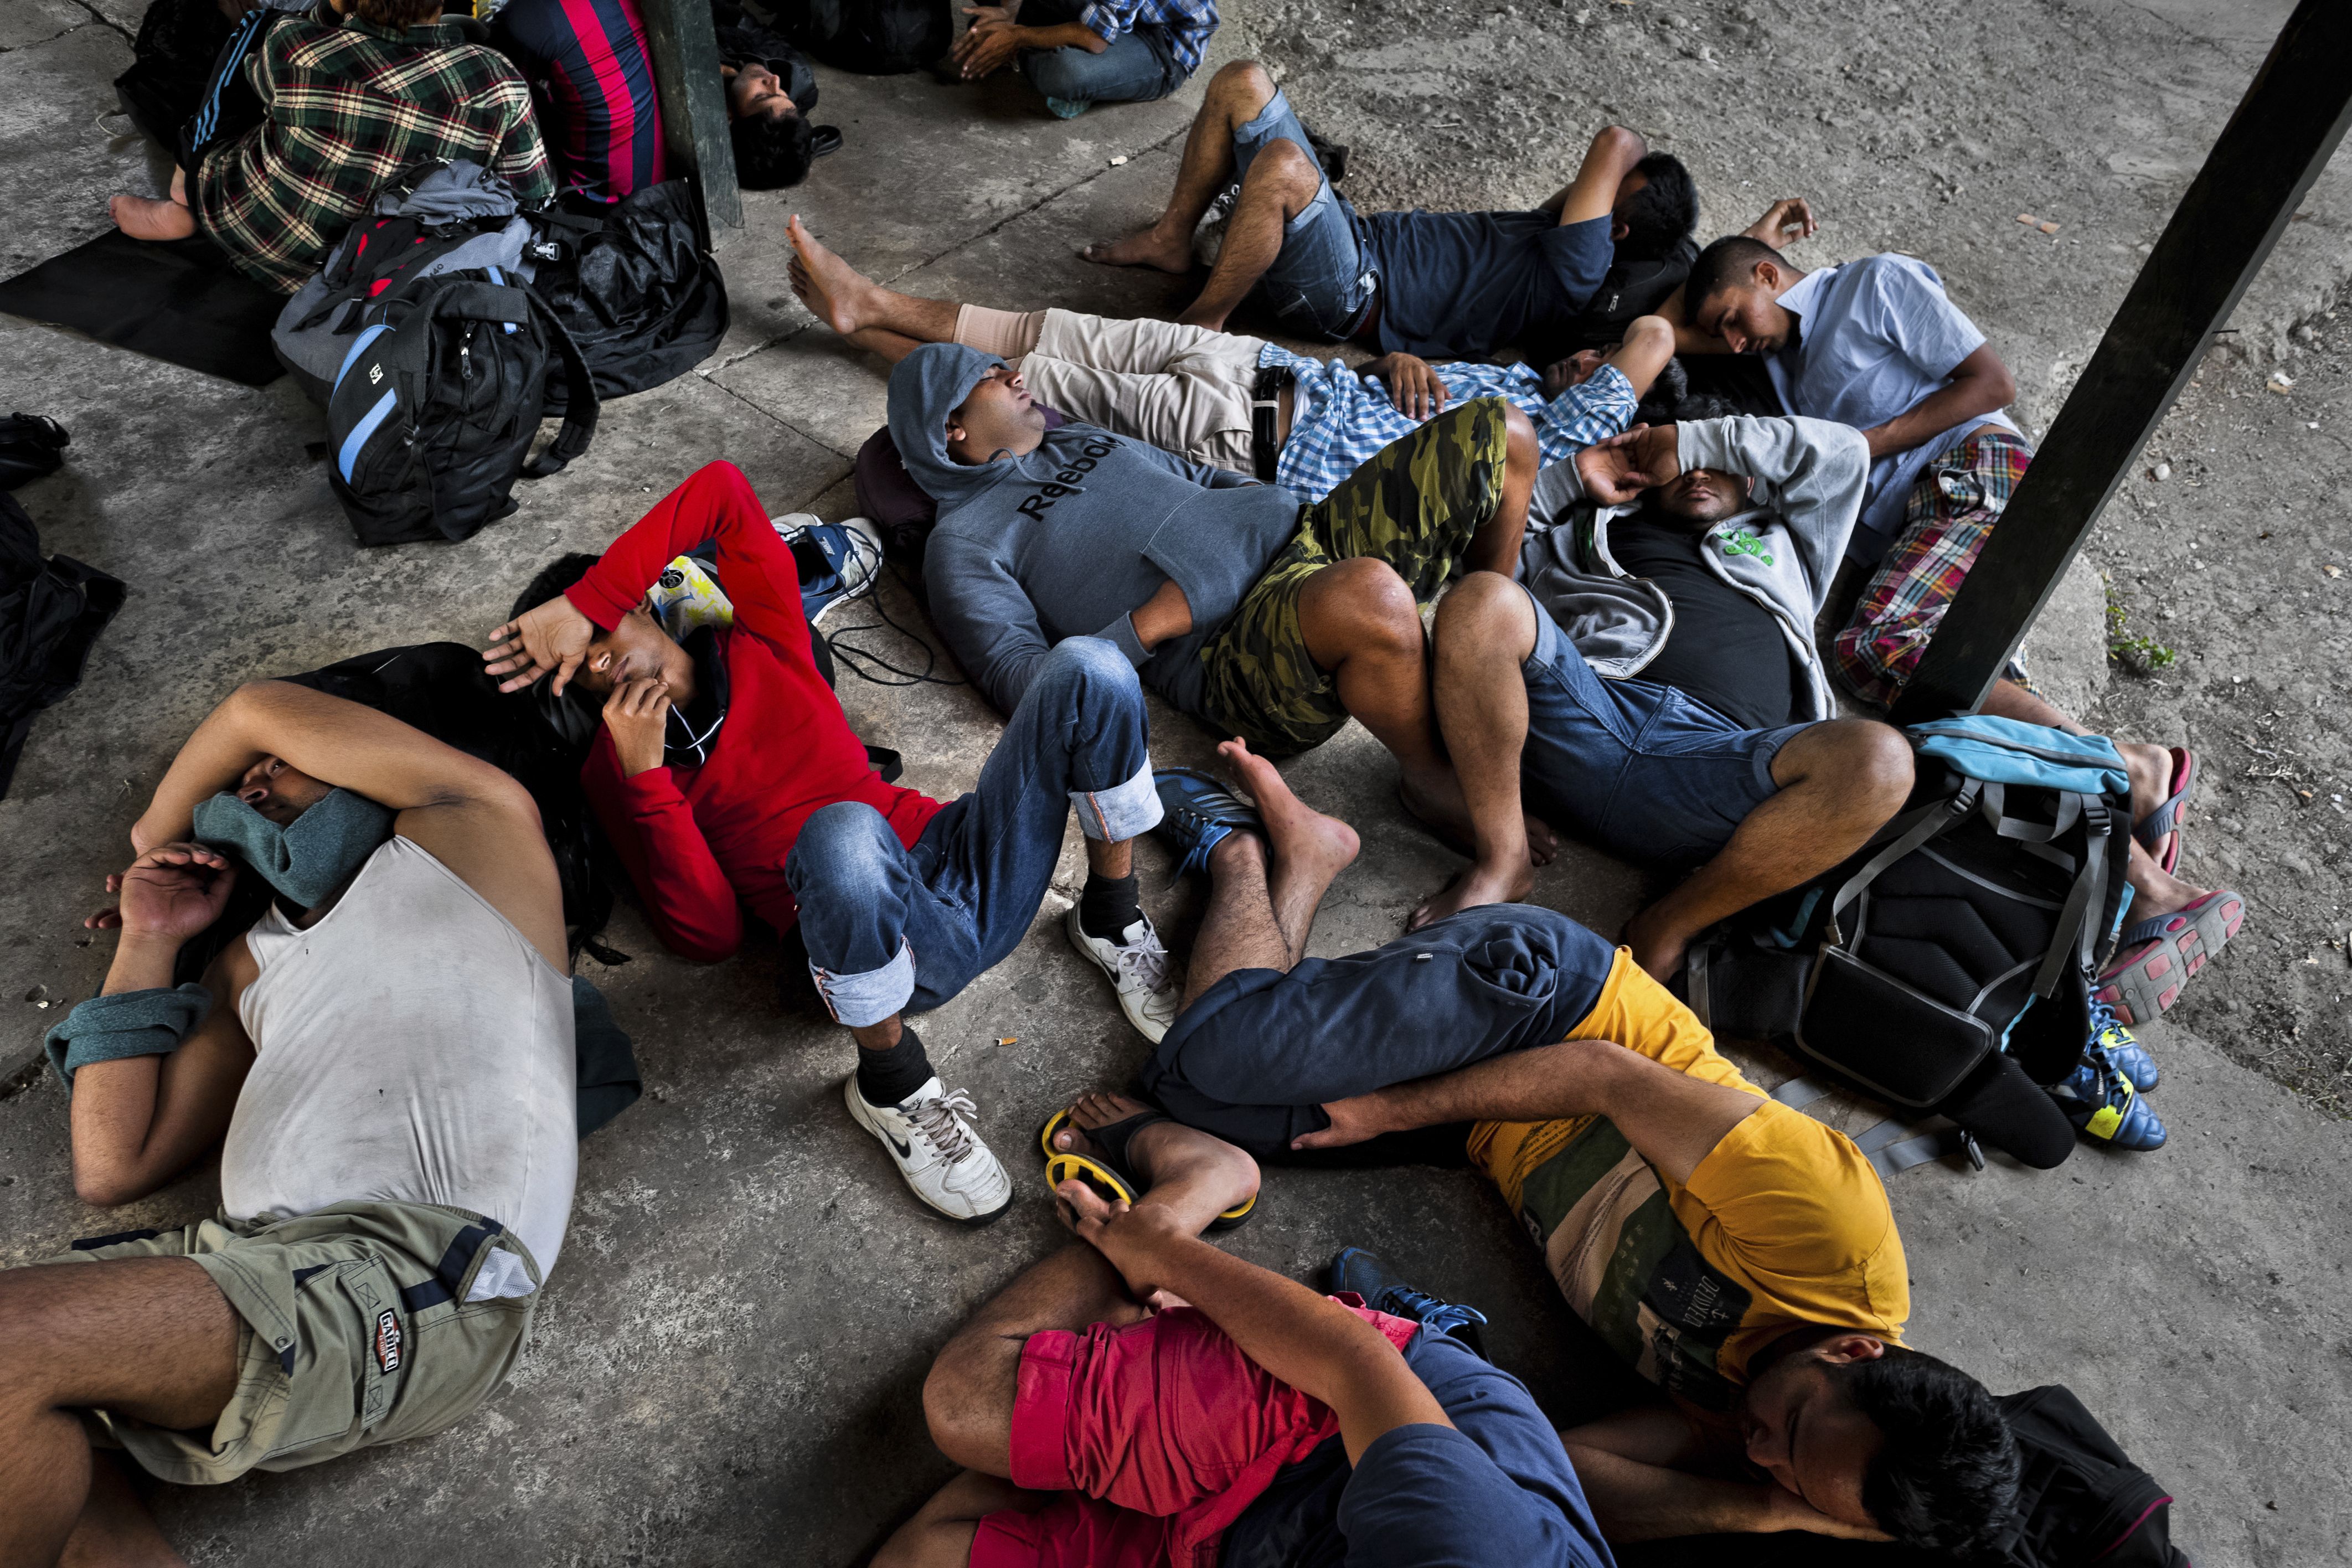 Nepalese immigrants, heading to the southern U.S. border, lie exhausted on the ground in the border checkpoint after crossing the jungle of Darién gap on January 28, 2015 in Darien, Panama. (Jan Sochor—LatinContent/Getty Images)